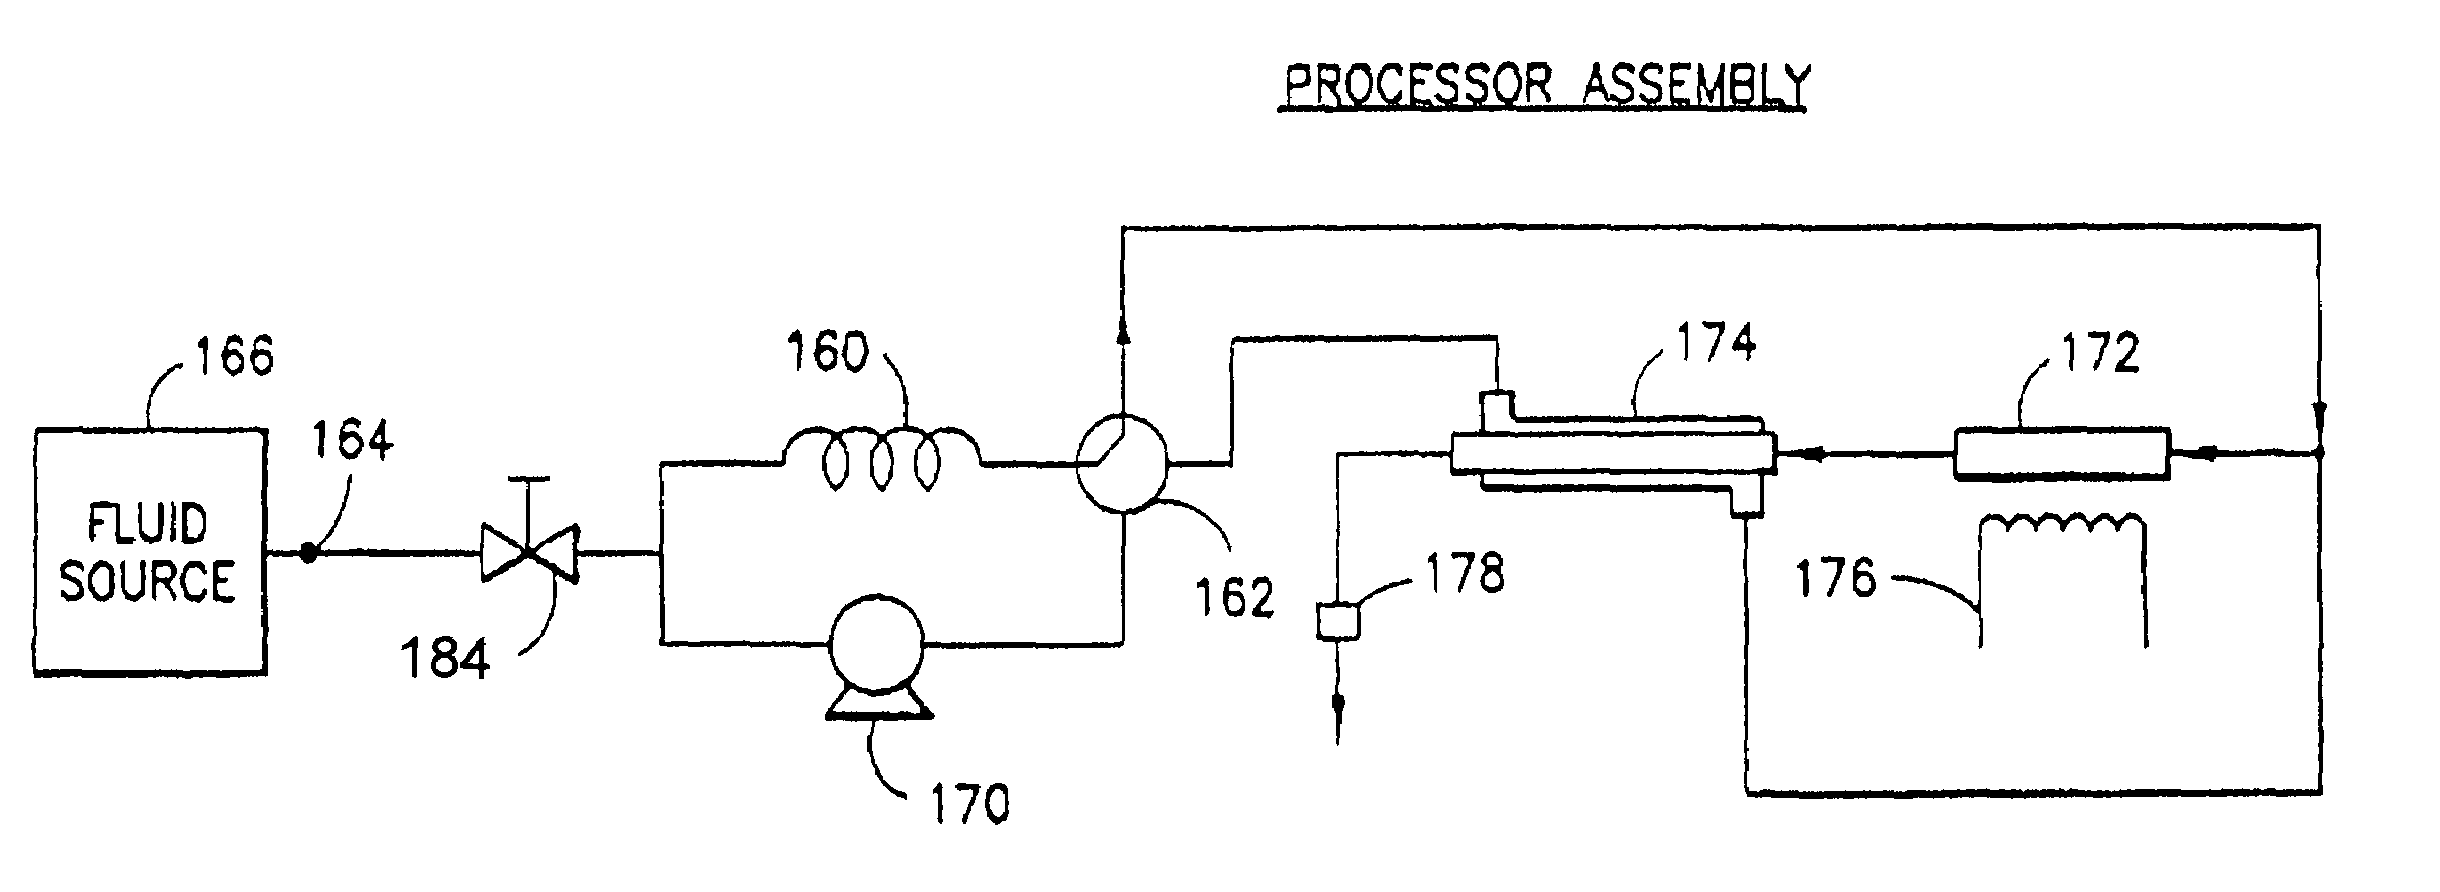 Apparatus and method for continuous depyrogenation and production of sterile water for injection